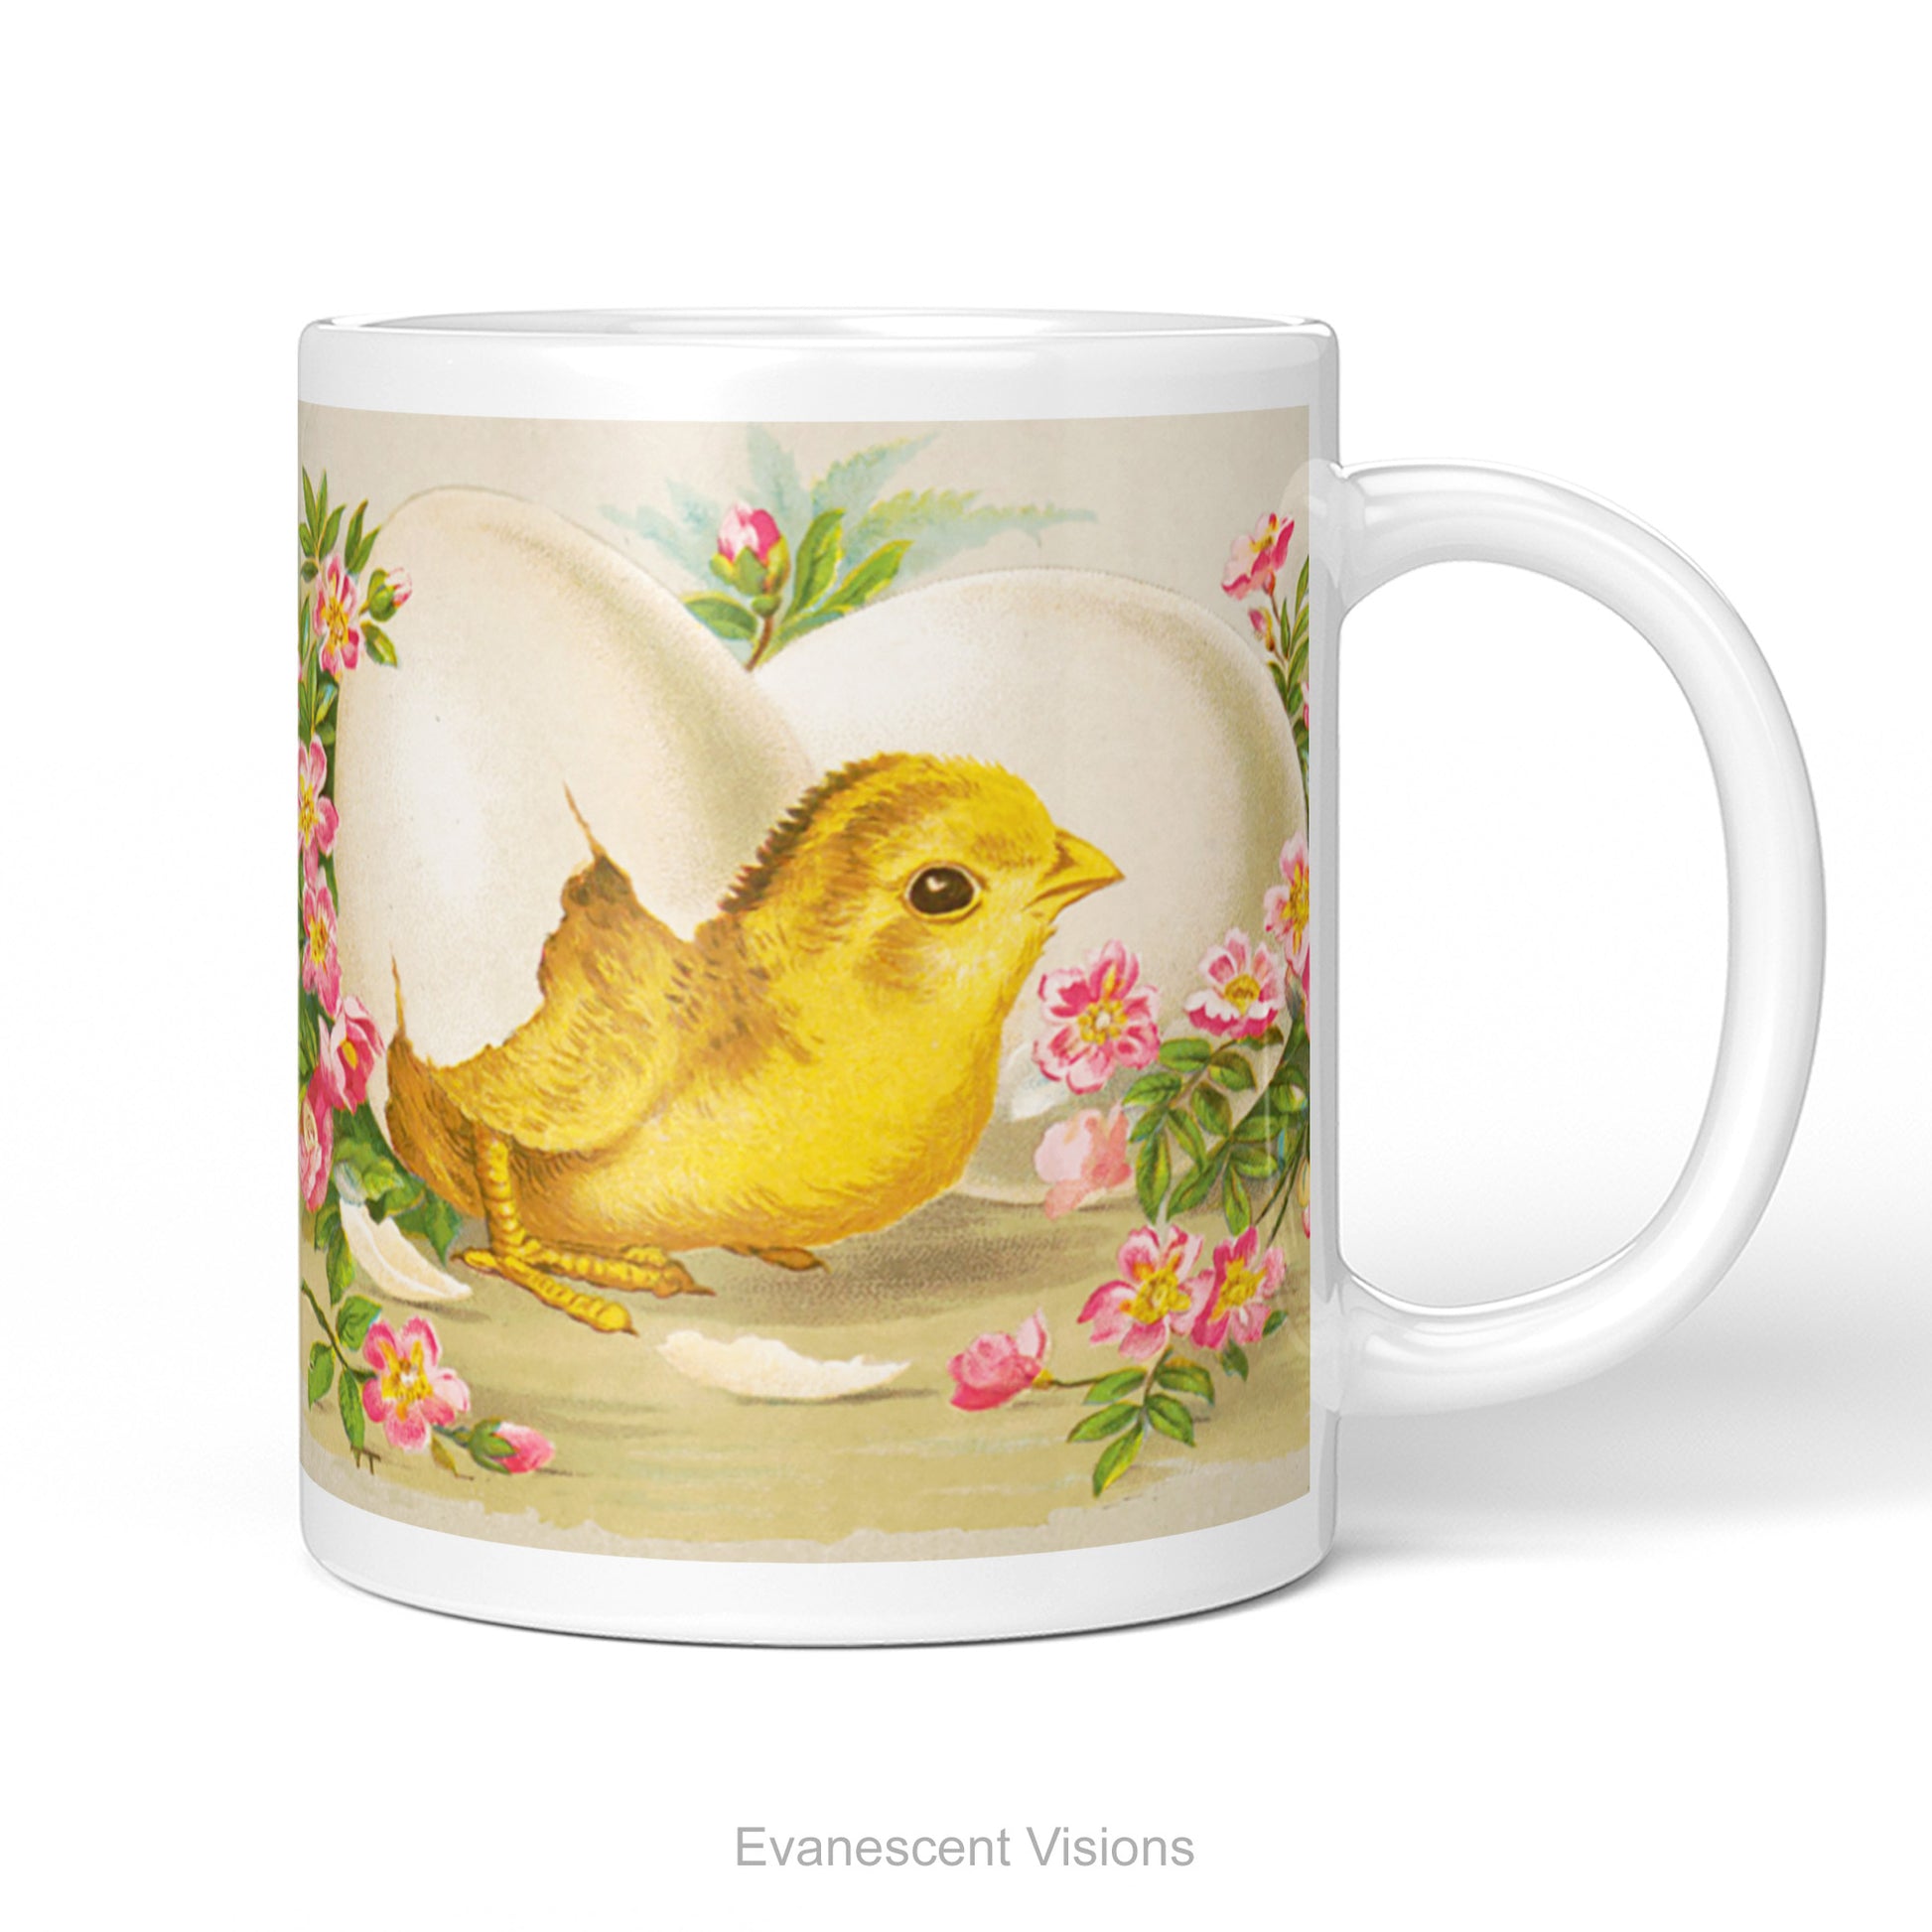 Mug with design of Easter Chick breaking out of an egg surrounded by pink flowers